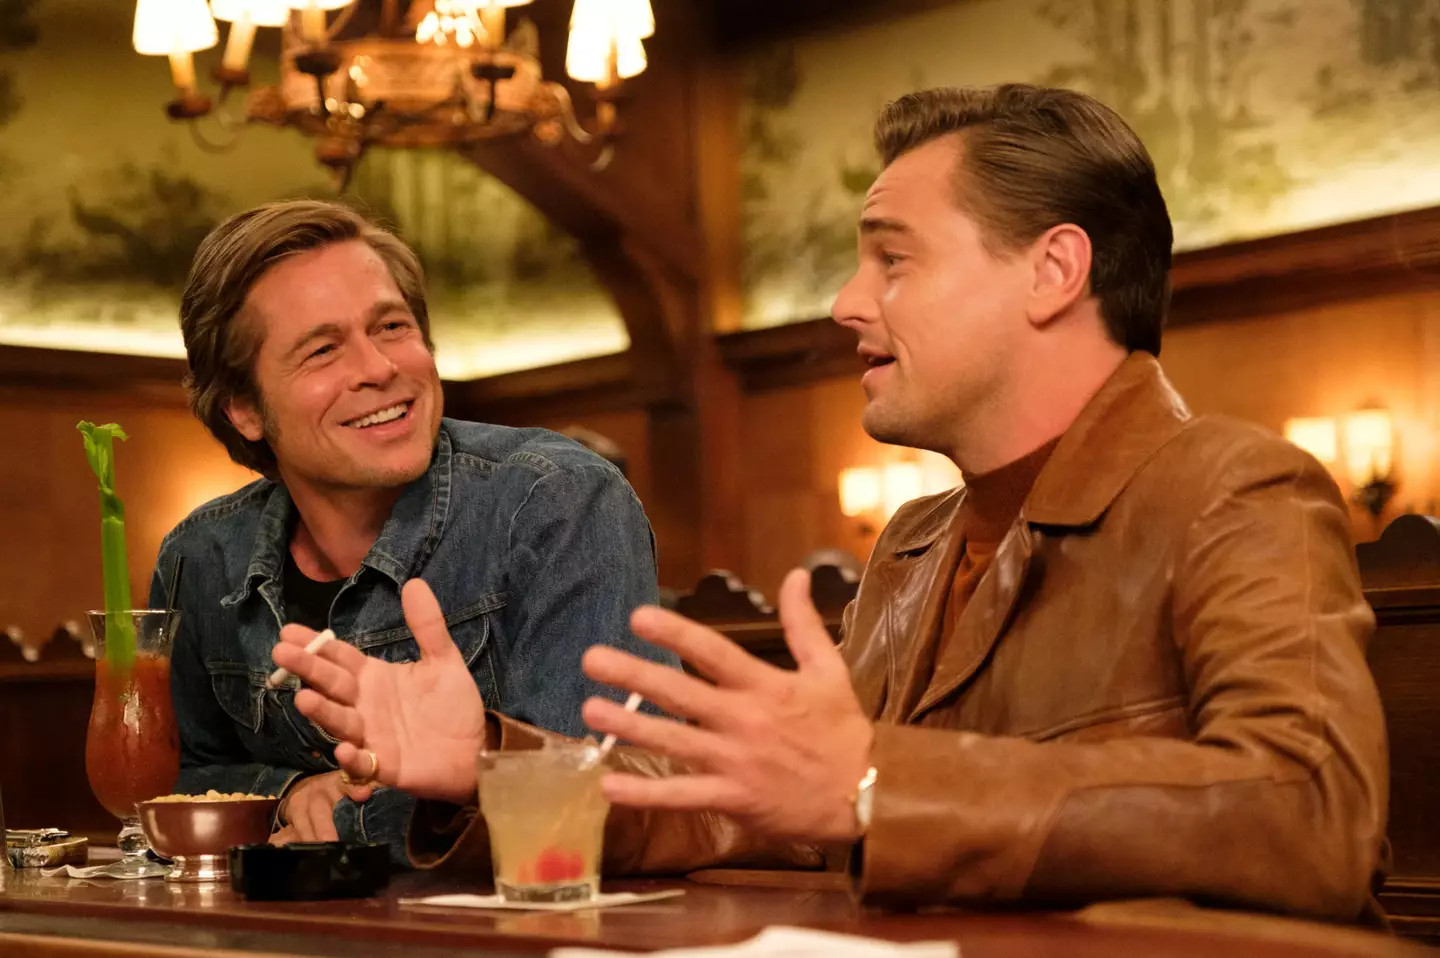 Tarantino's most recent project was Once Upon a Time... in Hollywood, which was released in 2019. (Columbia Pictures)